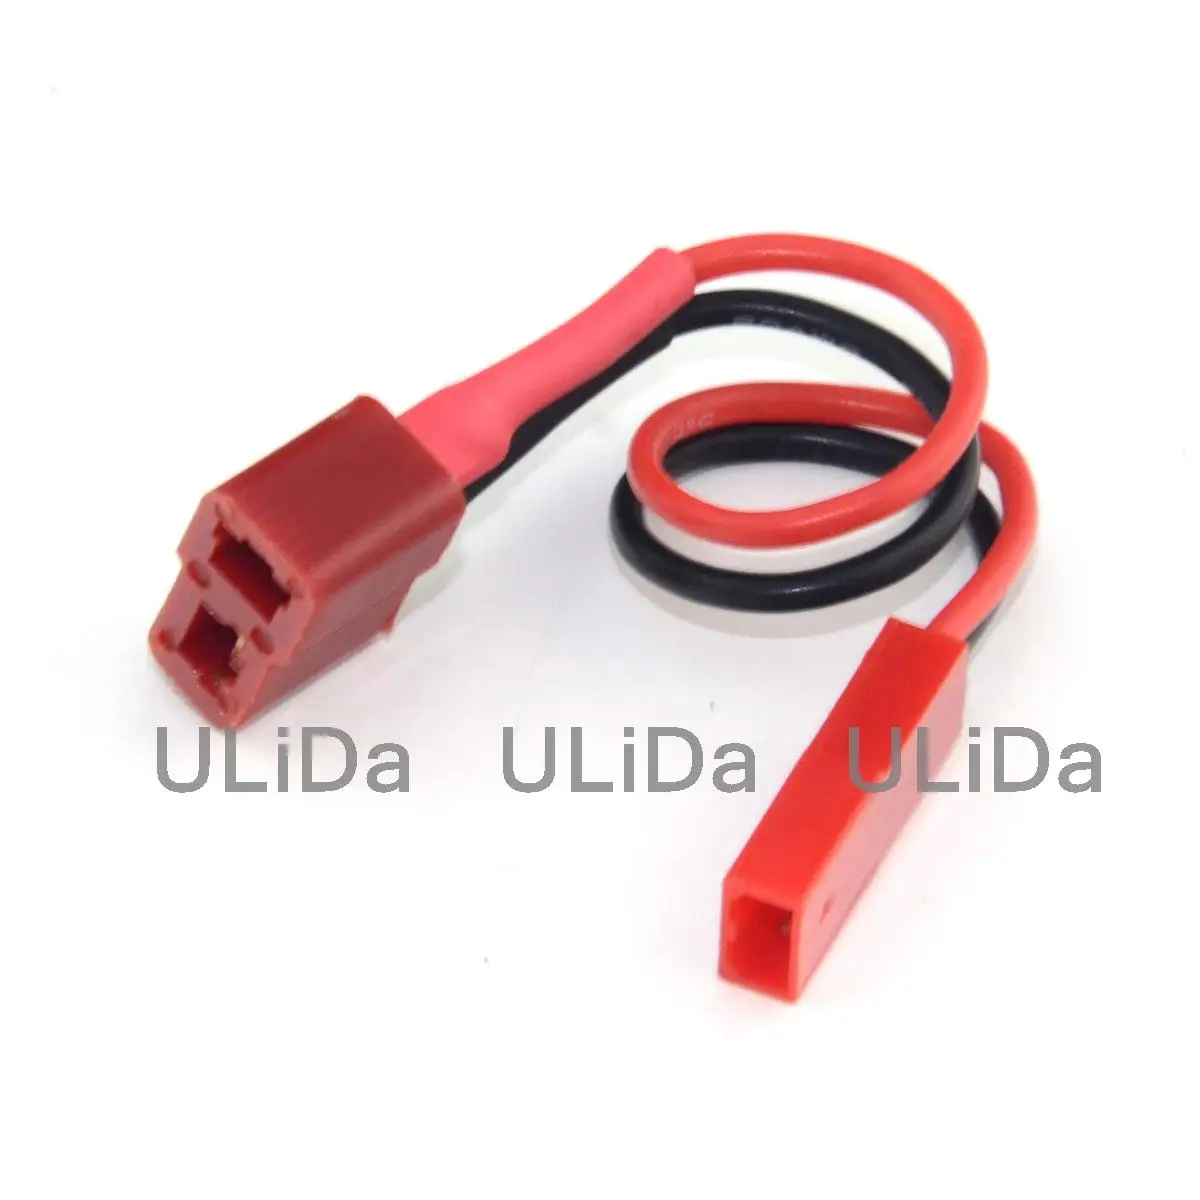 

3pcs 20AWG JST Female to T-Plug Female Connector Wire for RC Model Lipo Battery Quadcopter Car Helicopter